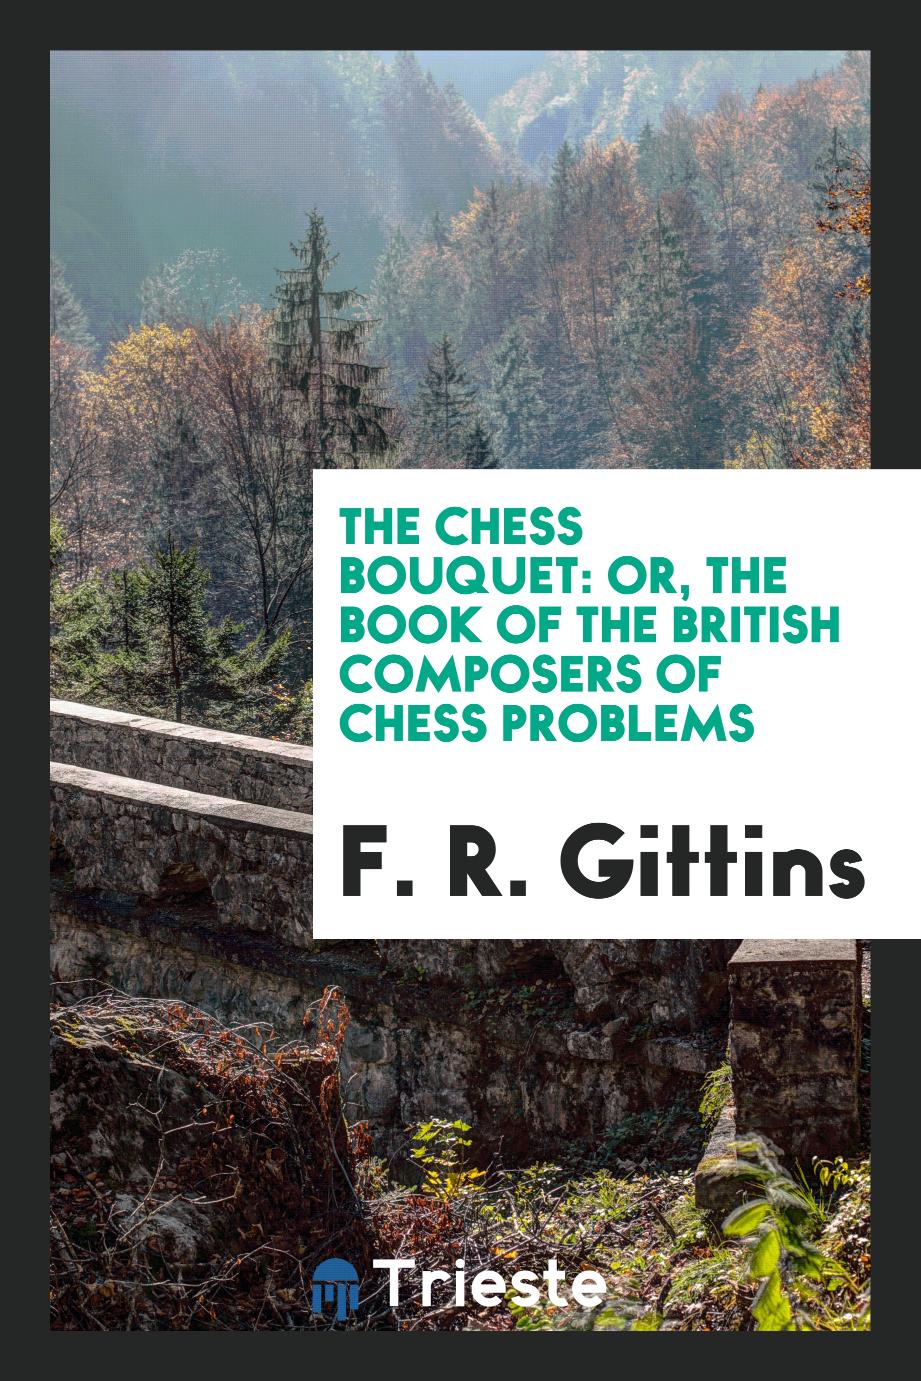 The Chess Bouquet: Or, The Book of the British Composers of Chess Problems